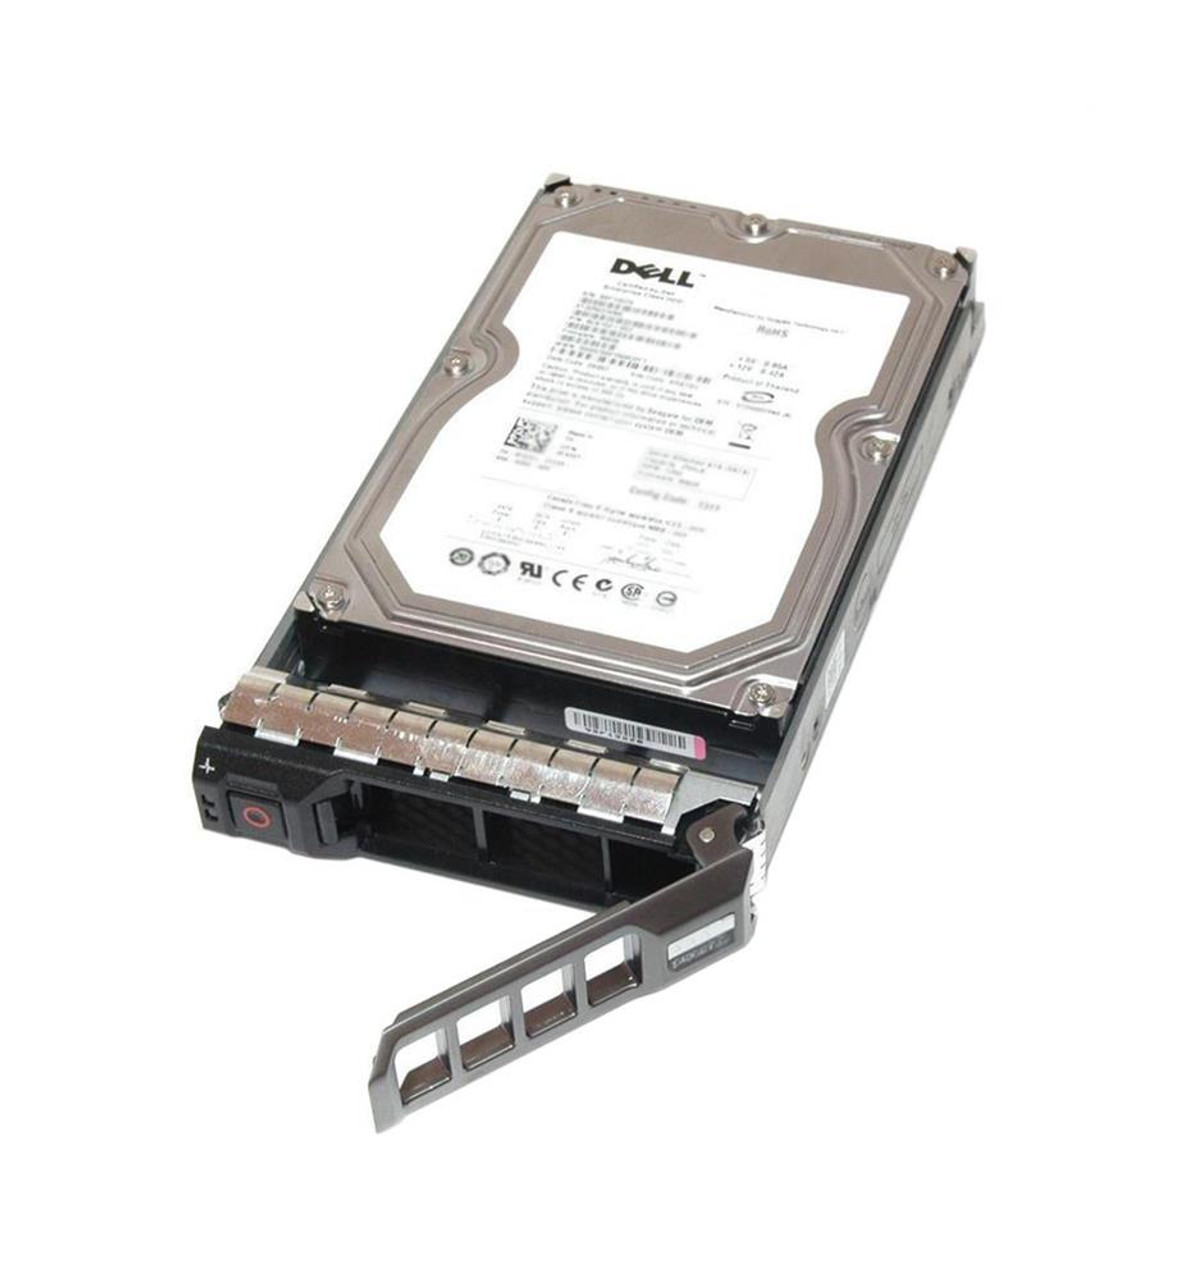 400-AUWK Dell 12TB 7200RPM SATA 6Gbps Hot Swap 256MB Cache (512e) 3.5-inch Internal Hard Drive with Tray